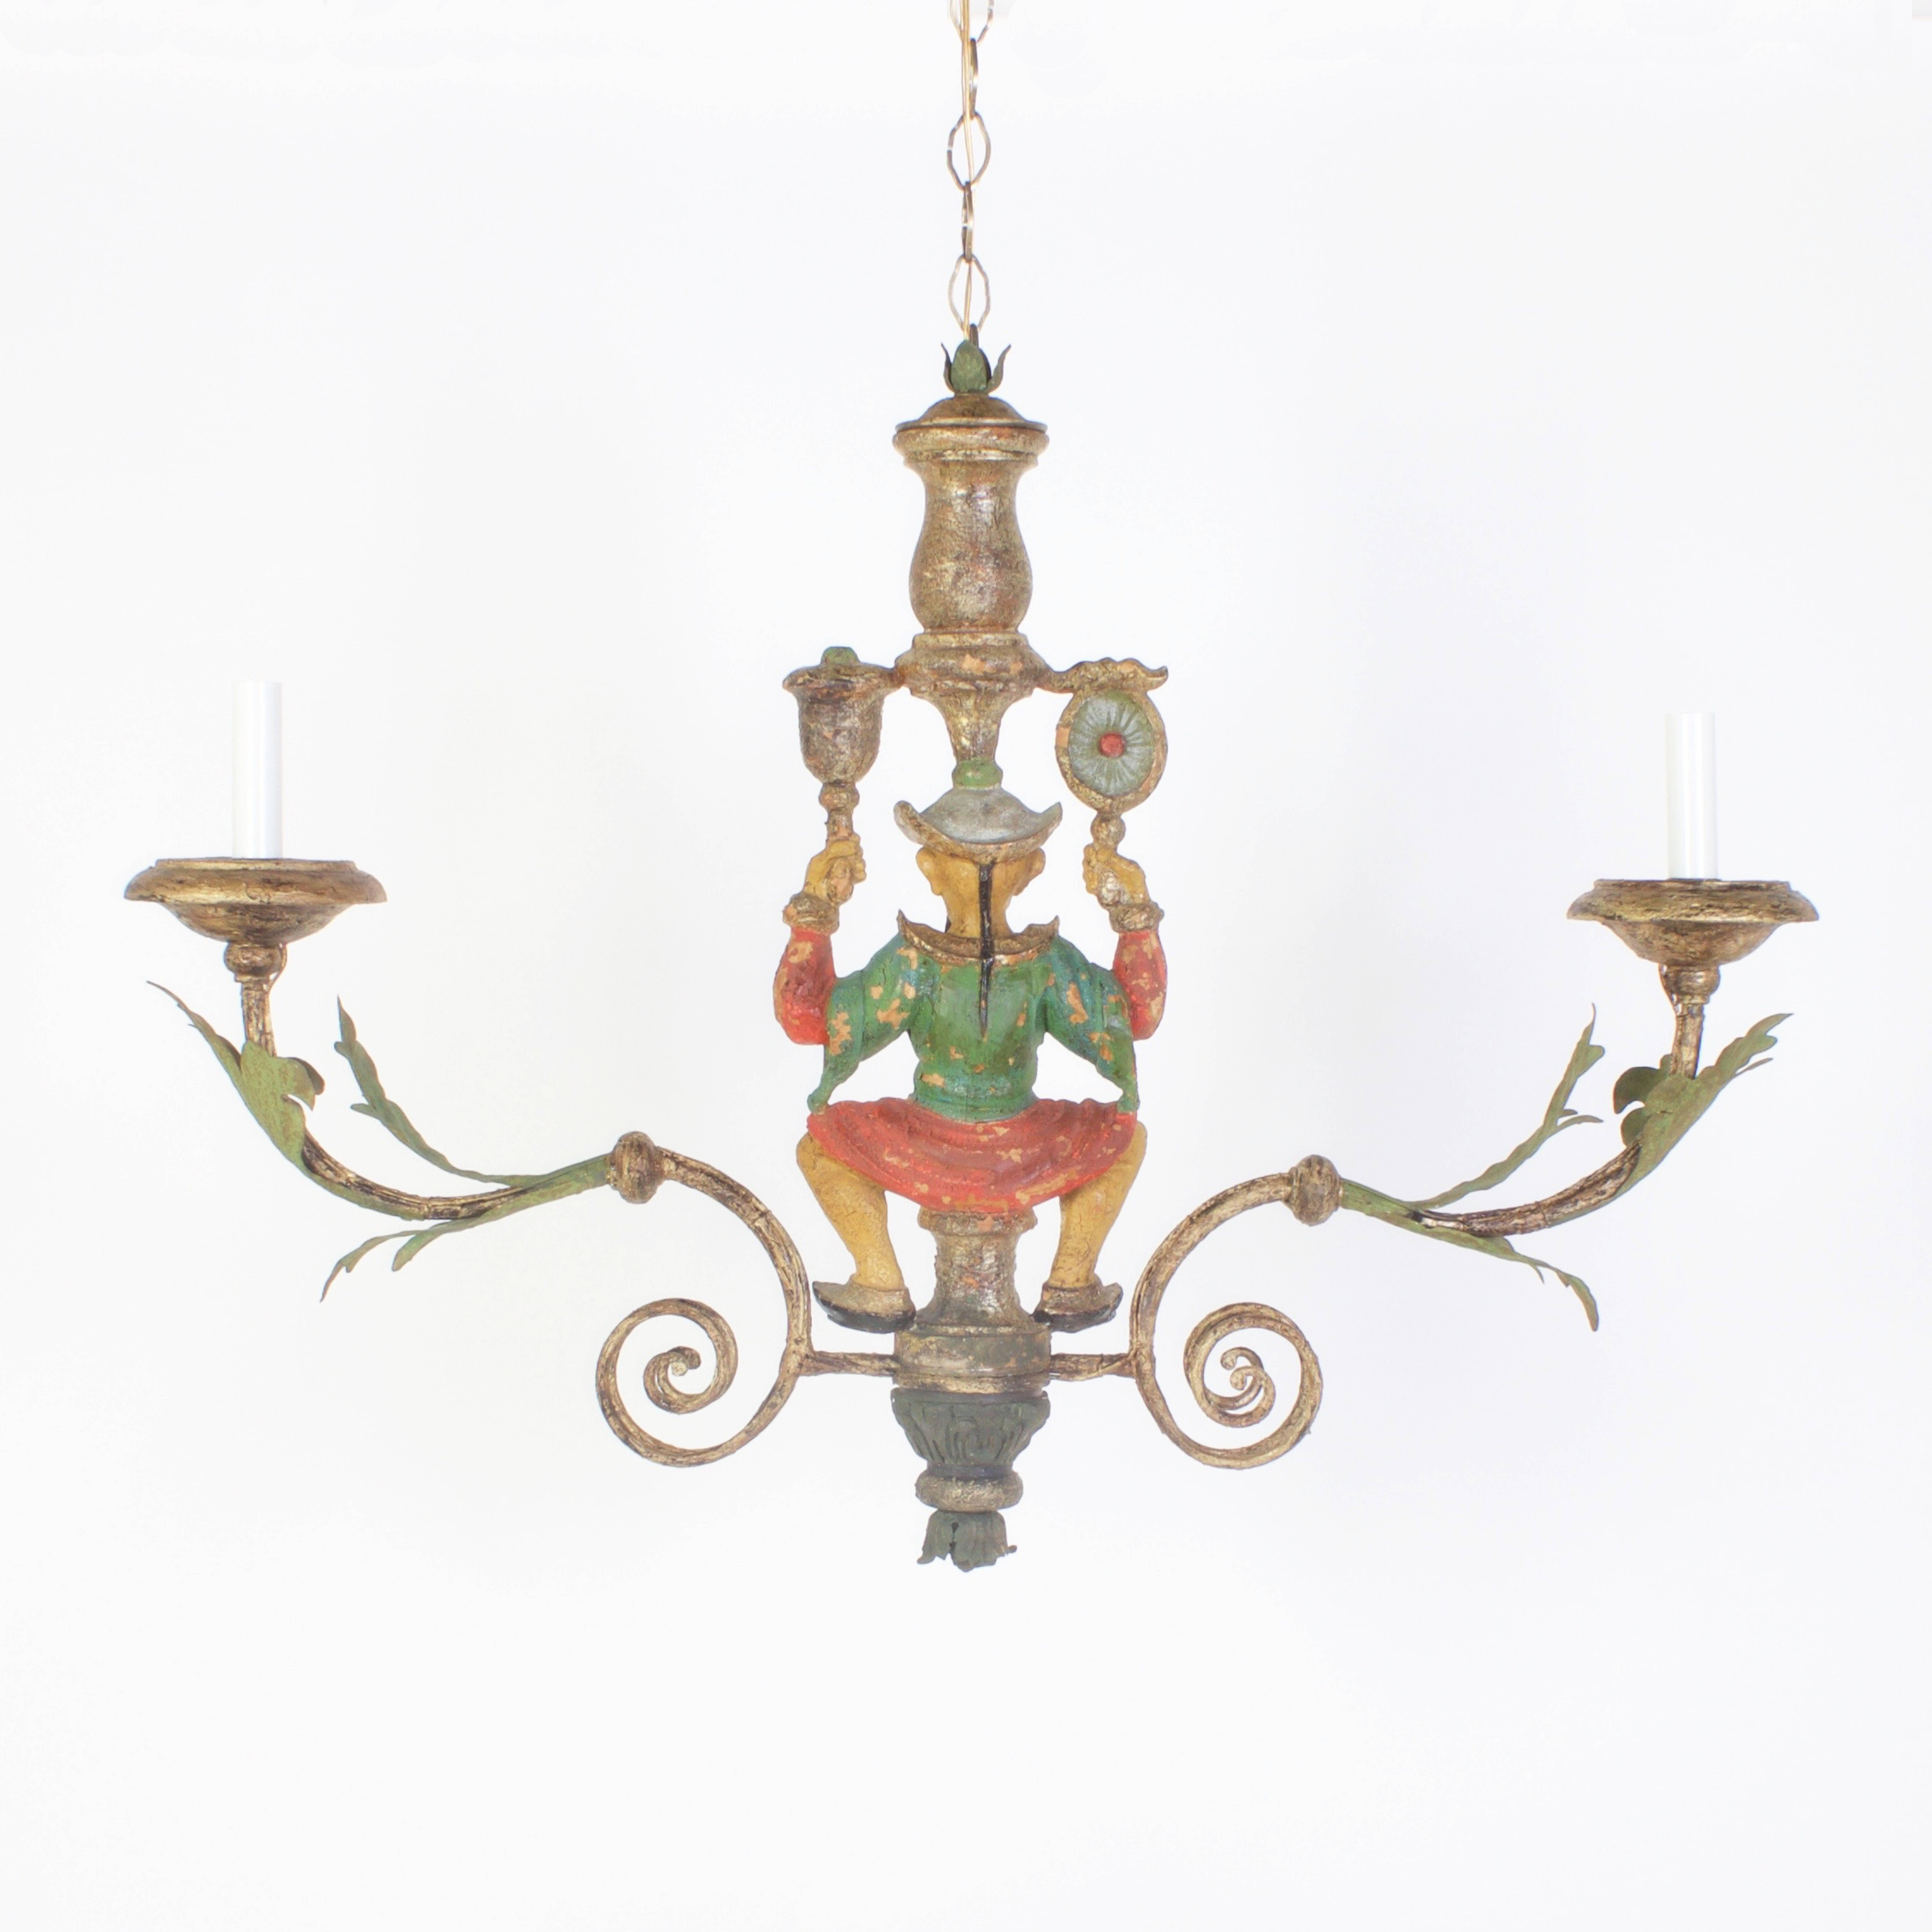 Here is a rare antique Italian chinoiserie chandelier or light fixture. The figure with the foo man choo mustache is carved wood, gesso and painted polychrome. The arms are wrought iron with tole painted tin acanthus leaves. This chandelier has